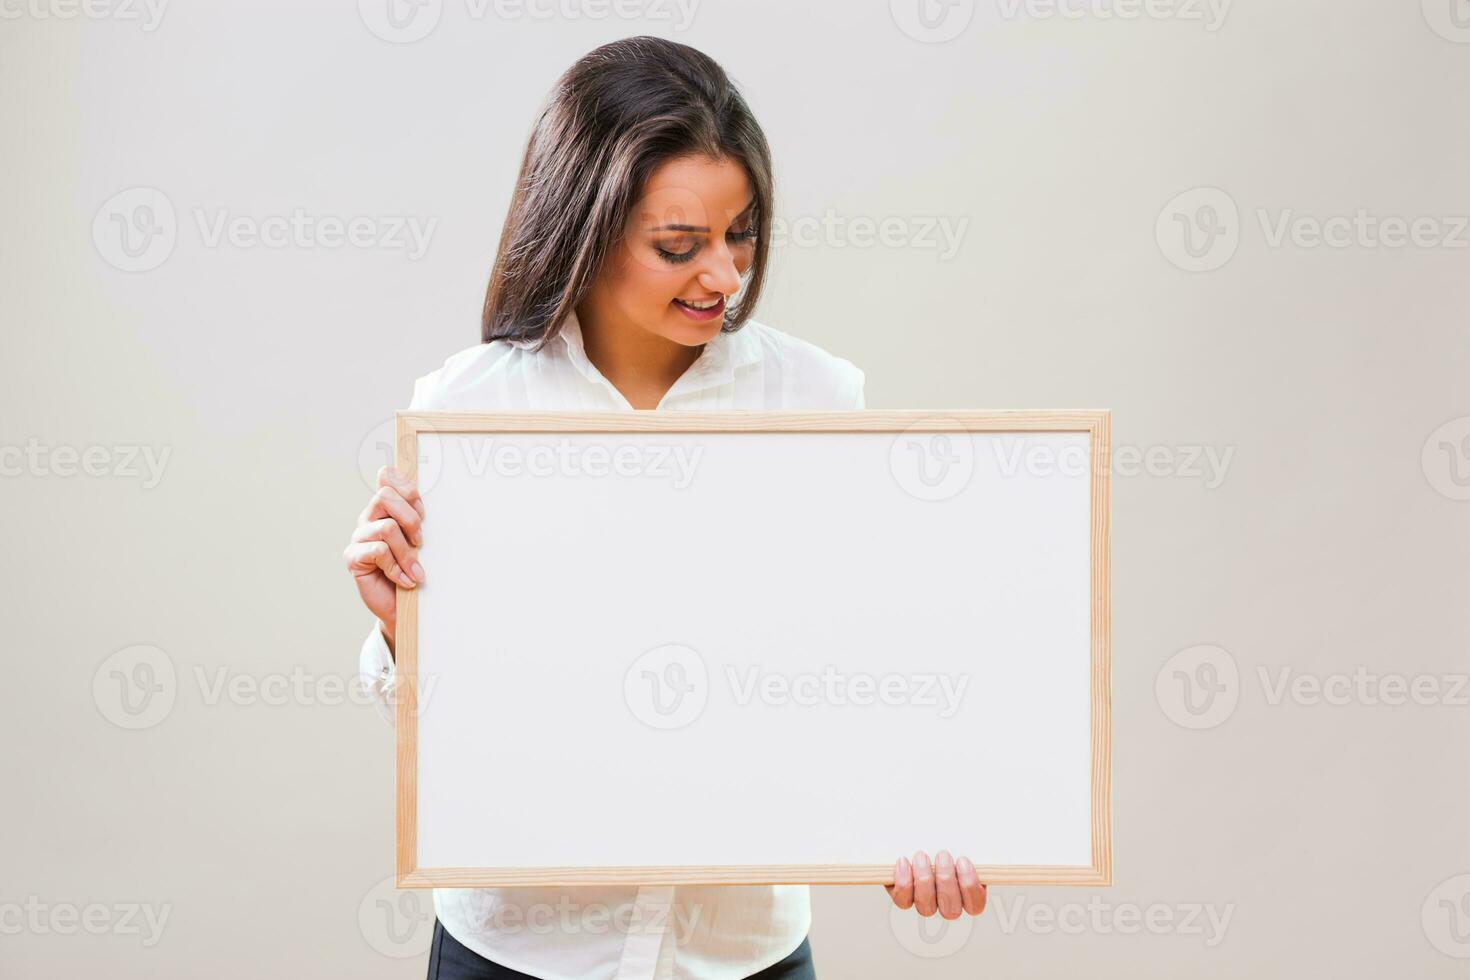 A woman with a blank board display photo